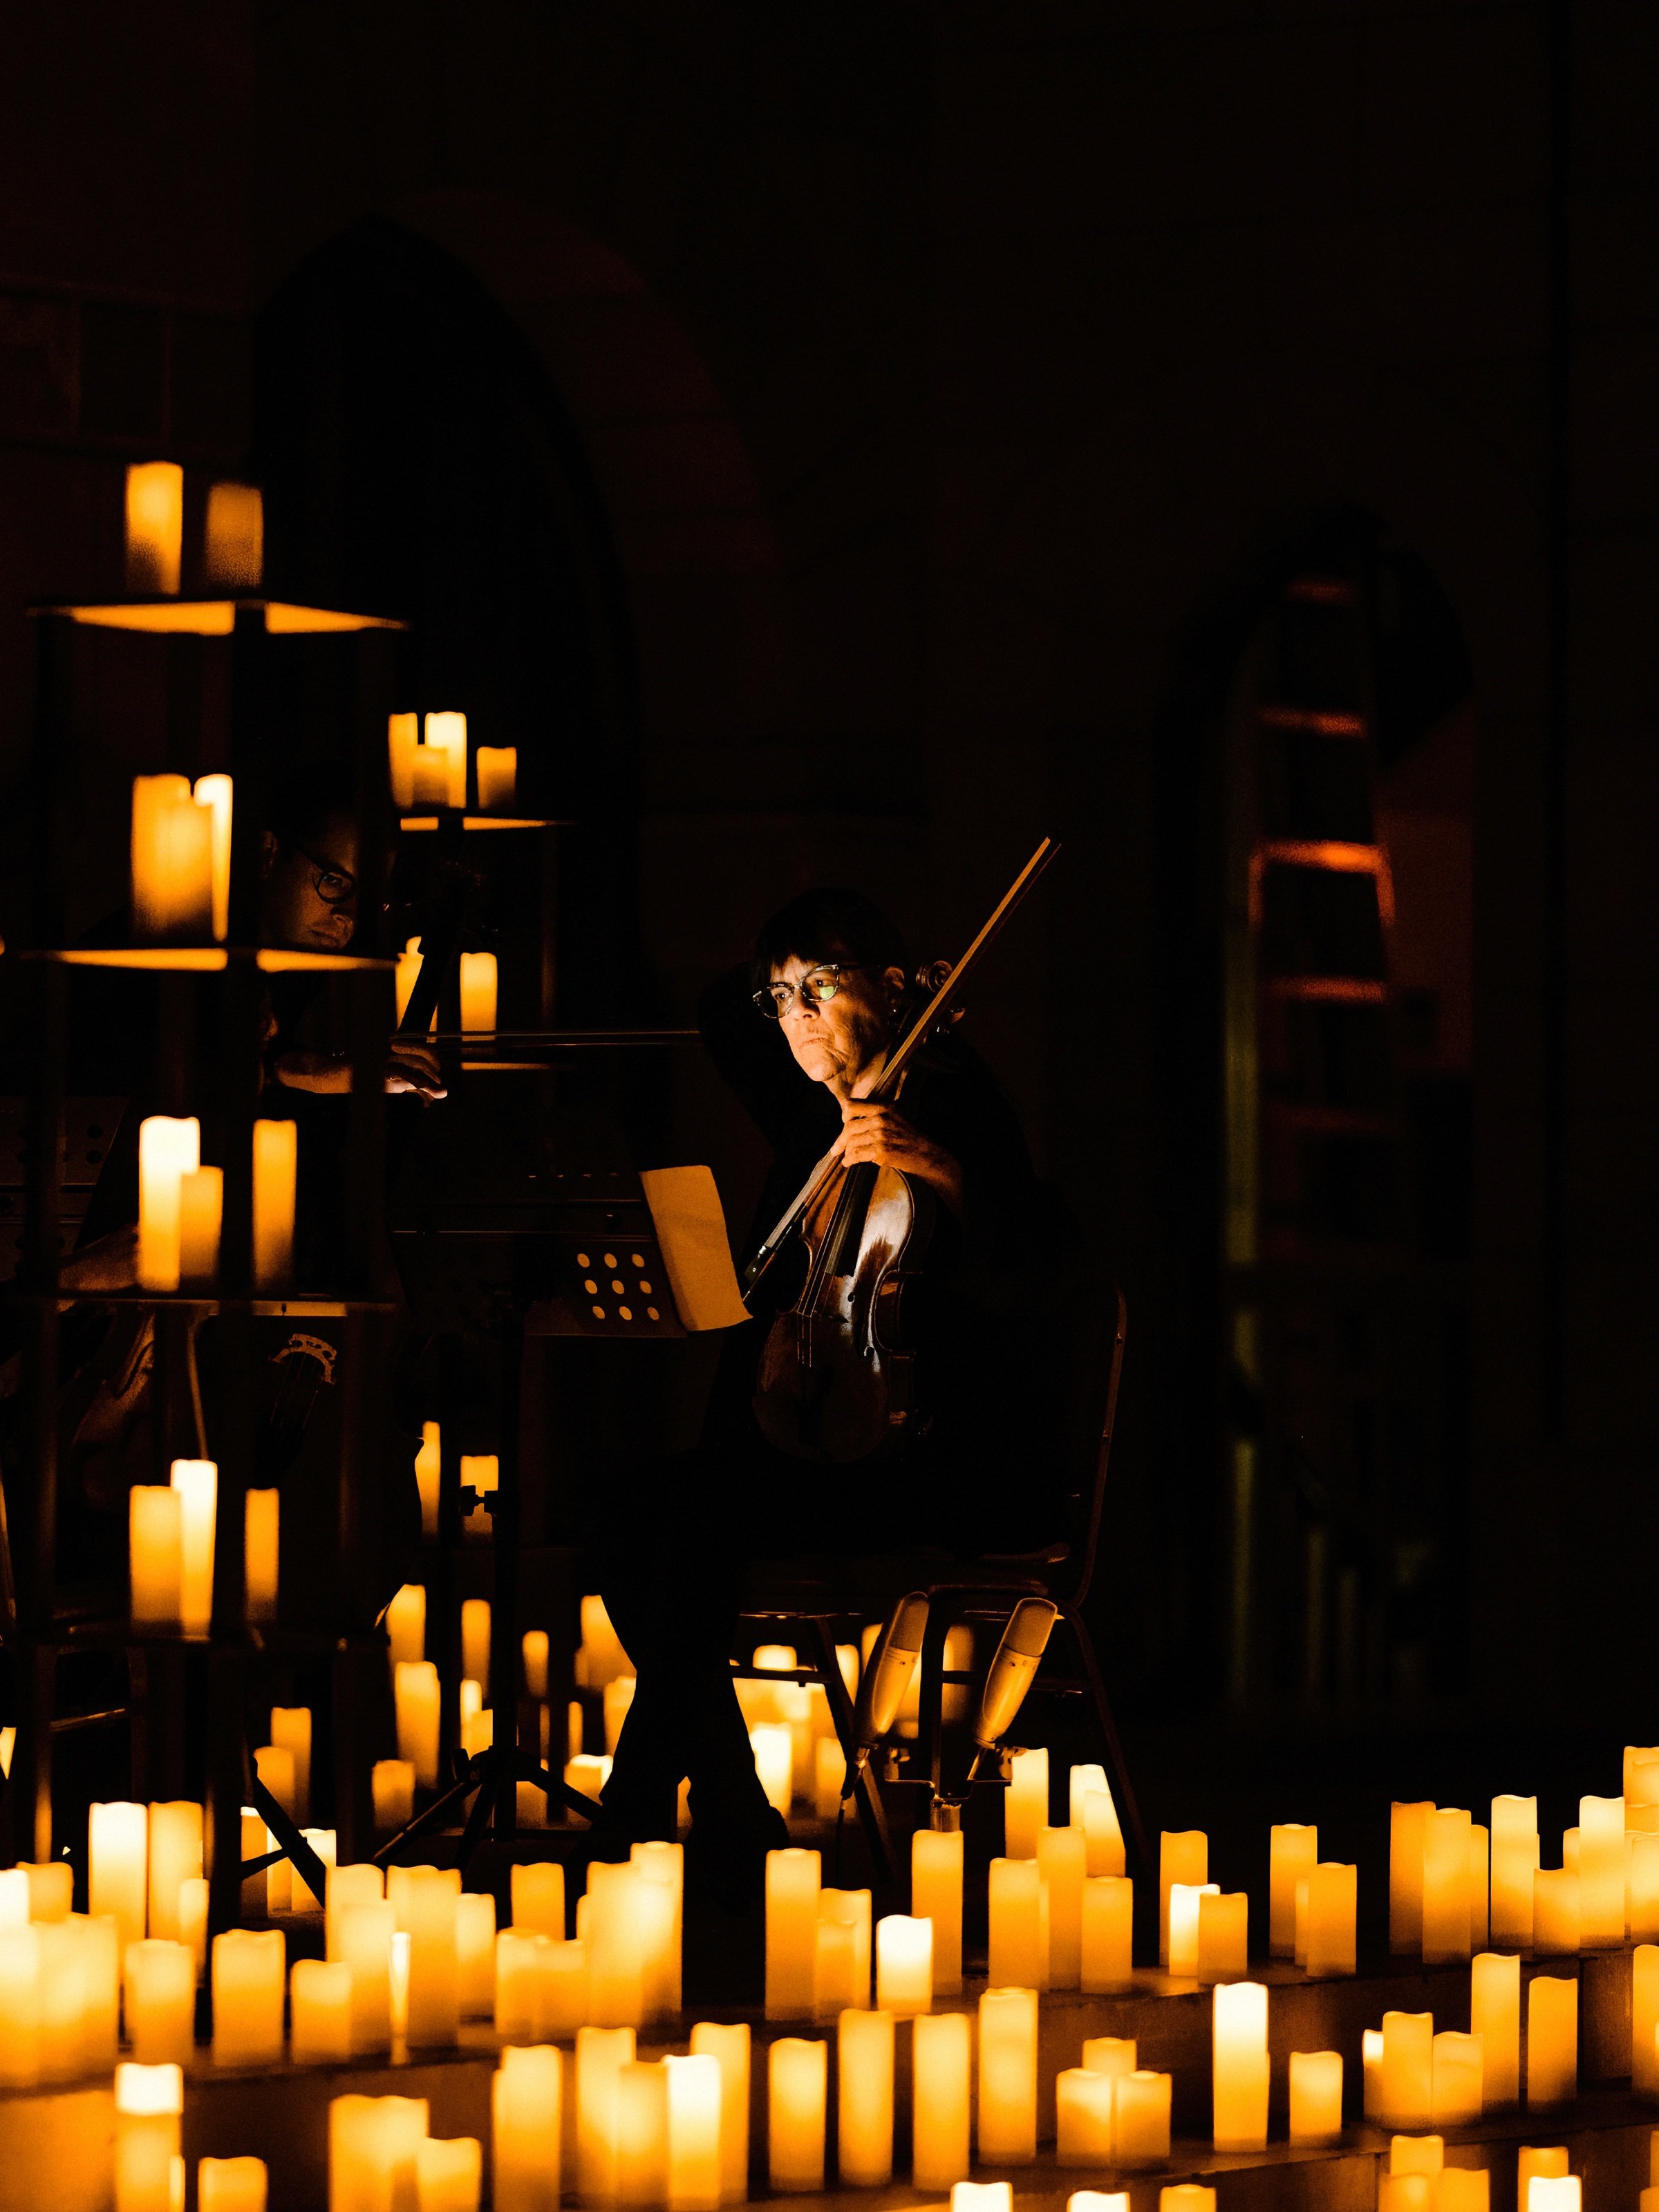 Grand Rapids Fountain Street Church Candlelight Concert Performance - Photographed for Fever by Ryan Inman - 21.jpg